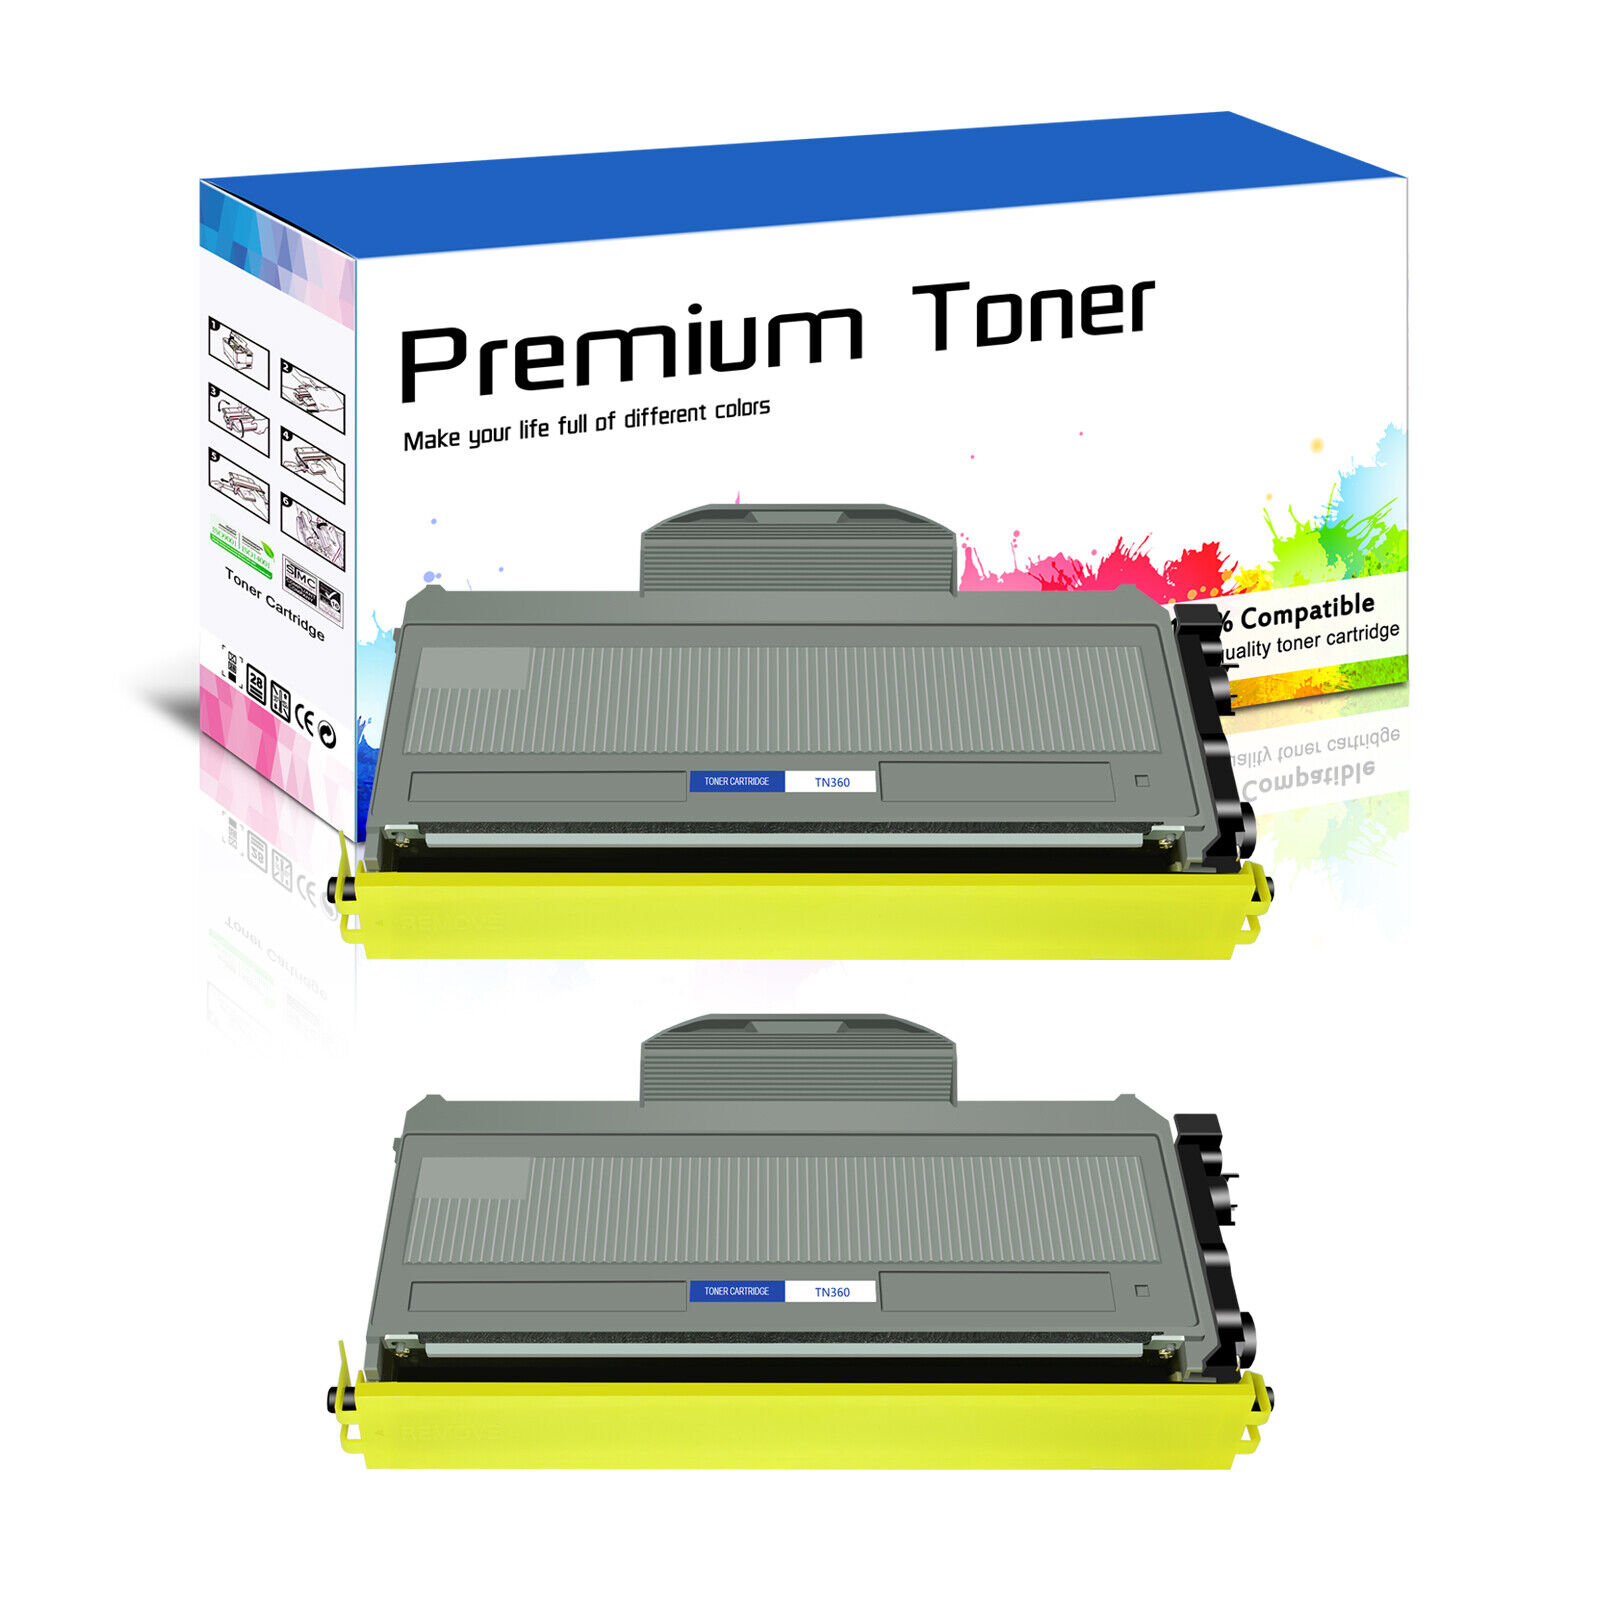 2x TN360 Toner Cartridge Fit for Brother HL-2140 2170W MFC-7340 7840W High Yield